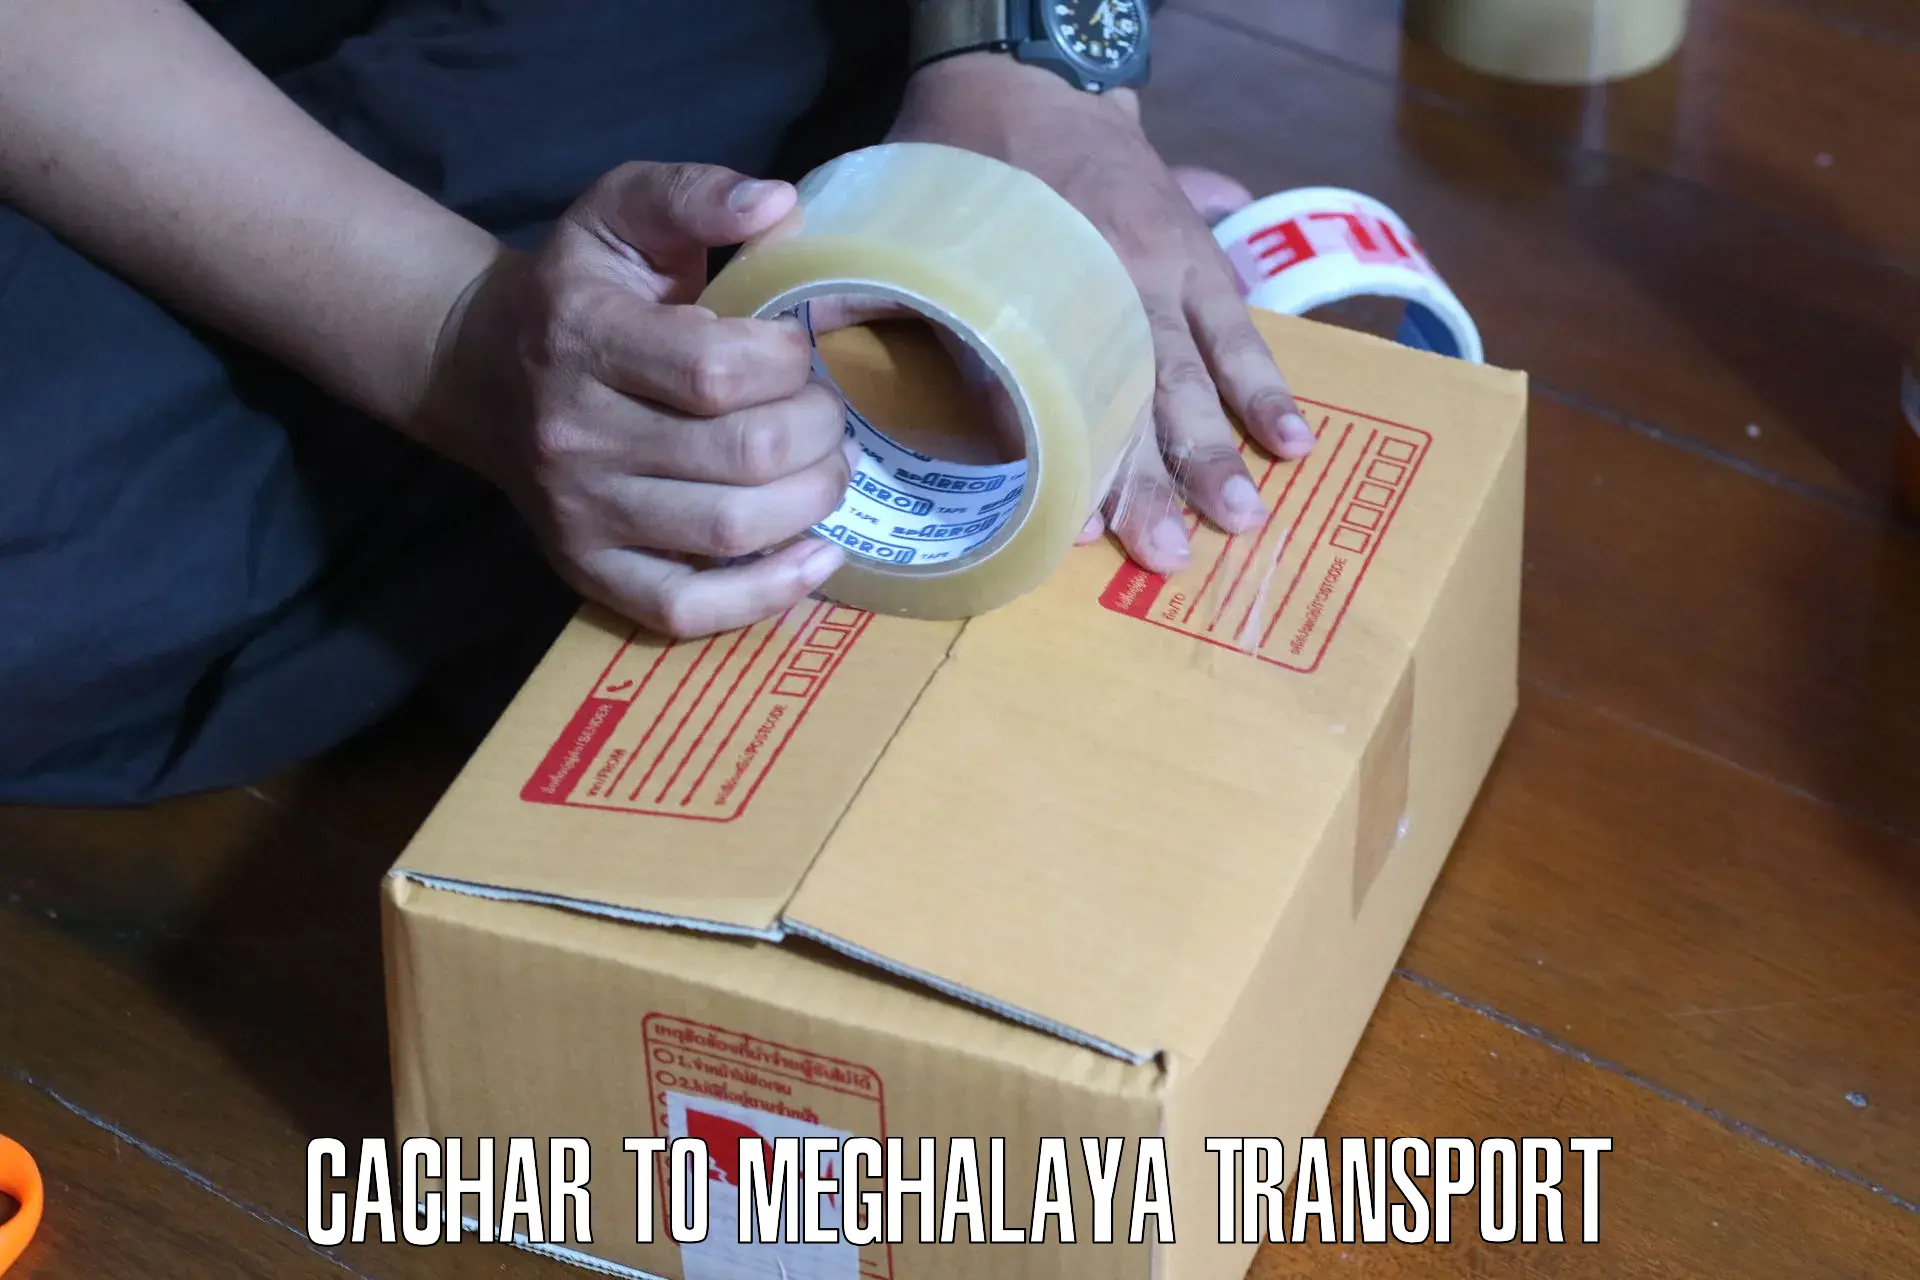 Daily parcel service transport Cachar to Shillong